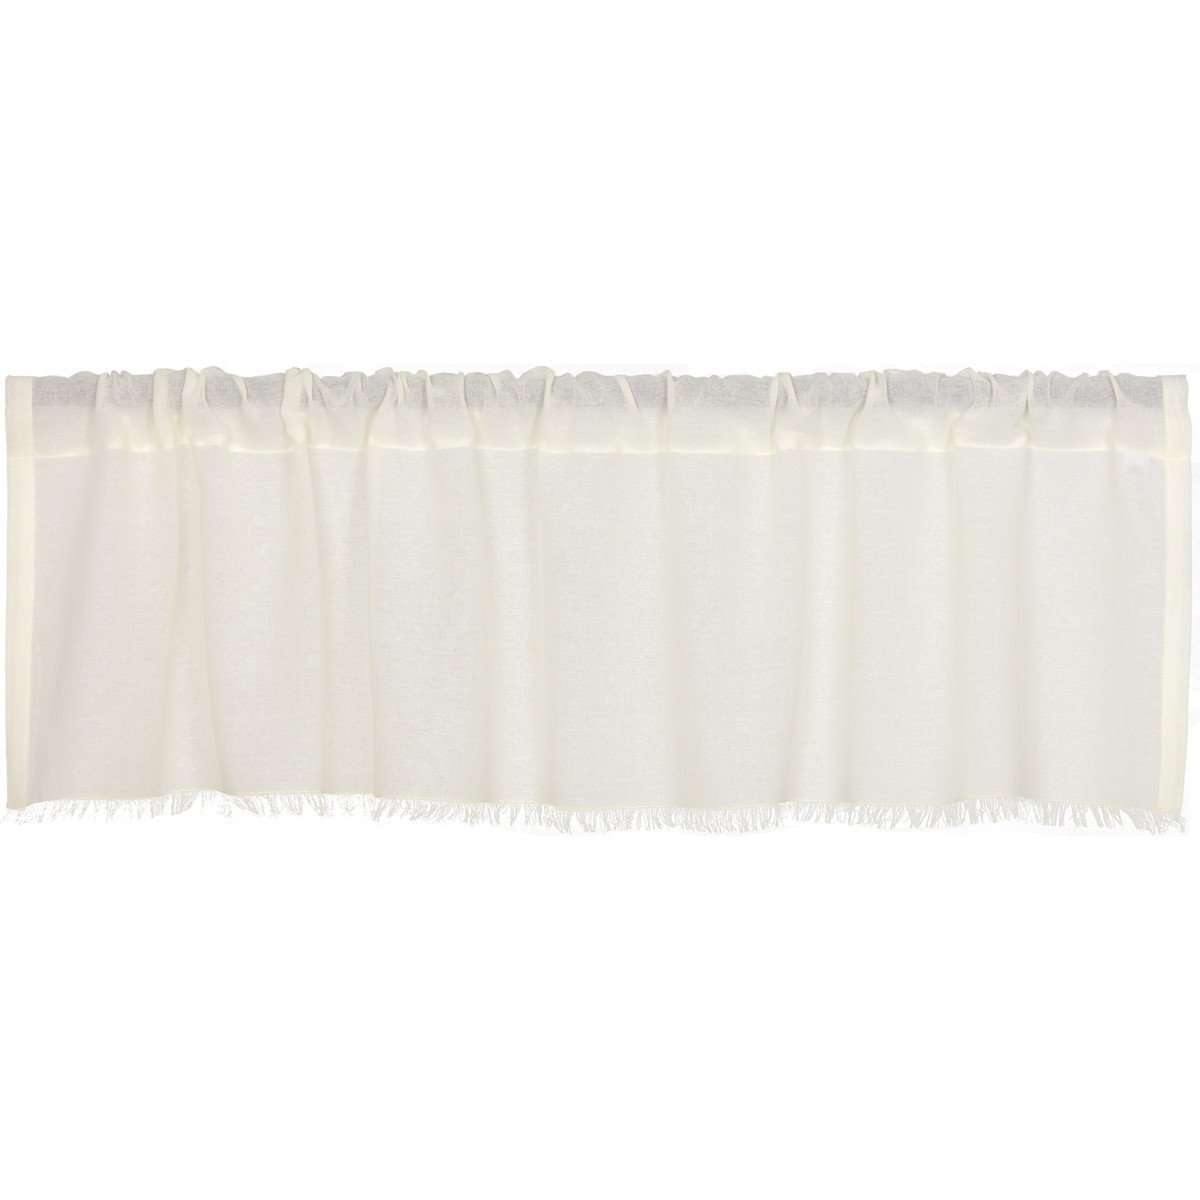 Tobacco Cloth Antique White Valance Fringed Curtain 16x60 VHC Brands - The Fox Decor